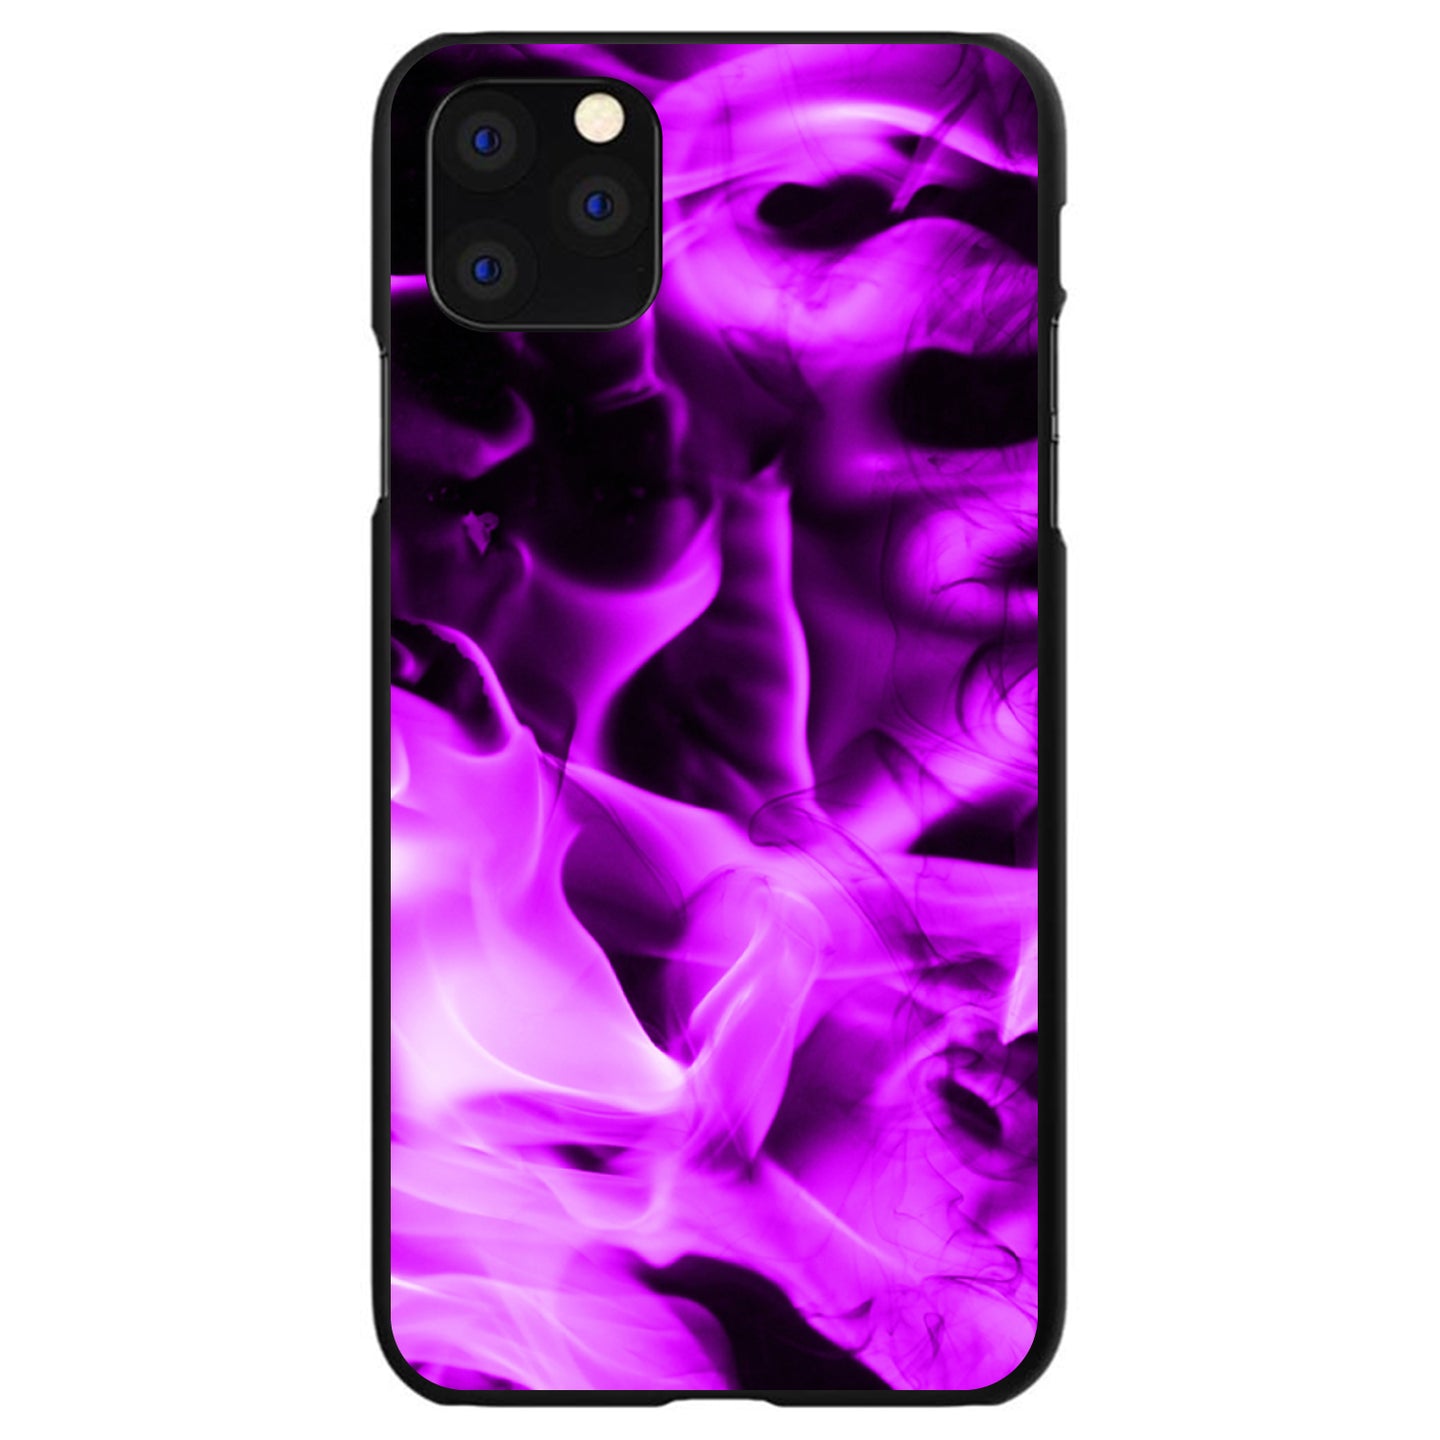 DistinctInk® Hard Plastic Snap-On Case for Apple iPhone or Samsung Galaxy - Violet Flame Fire